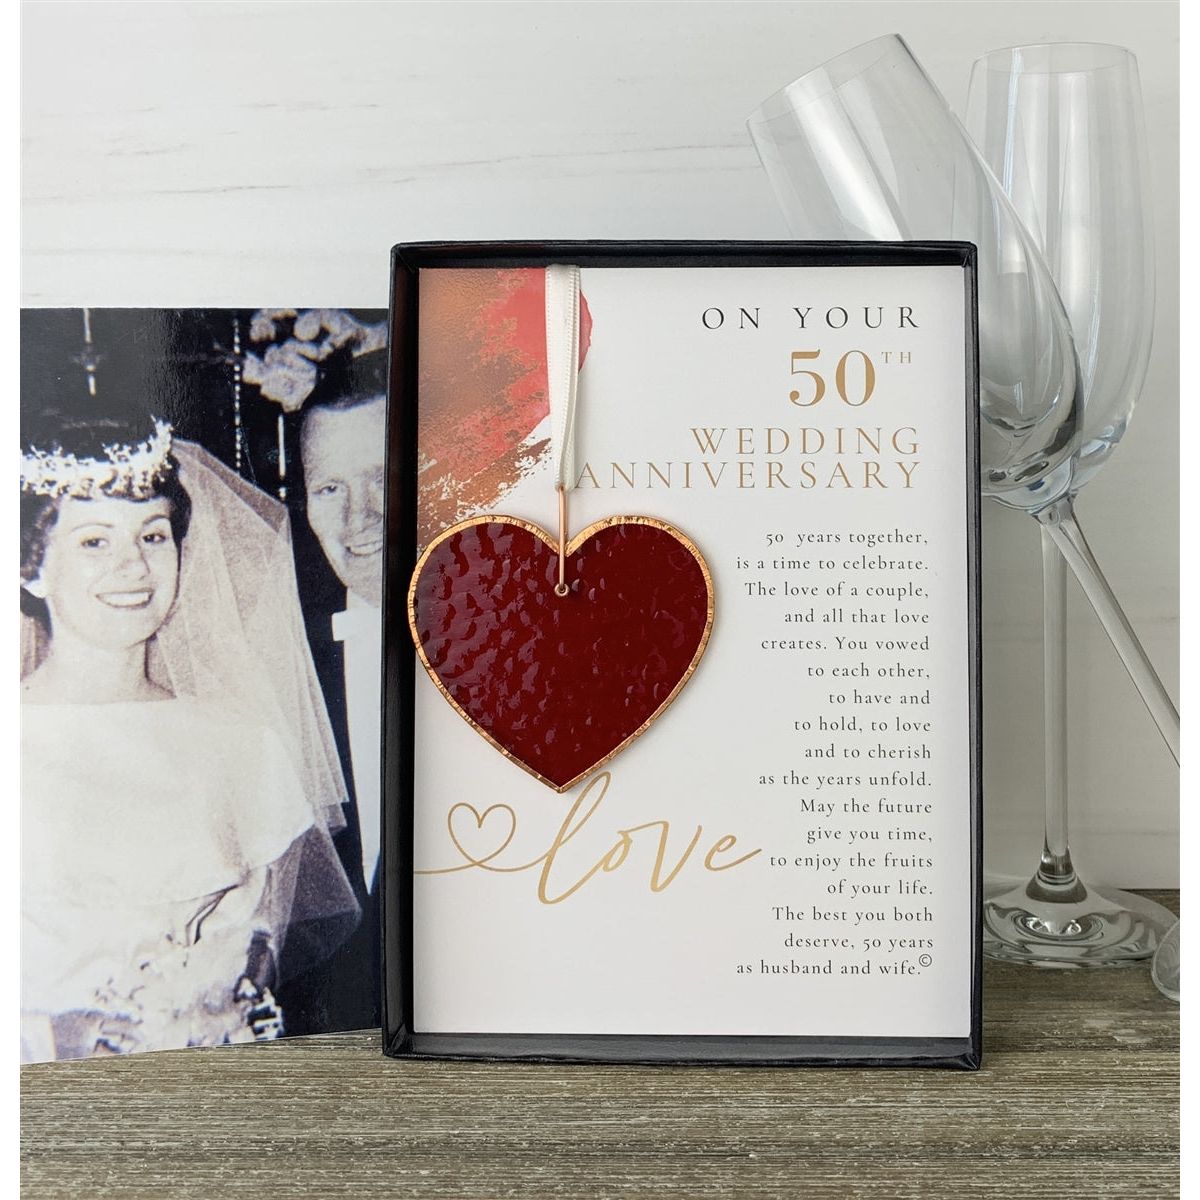 On Your 50th Wedding Anniversary: Glass Heart